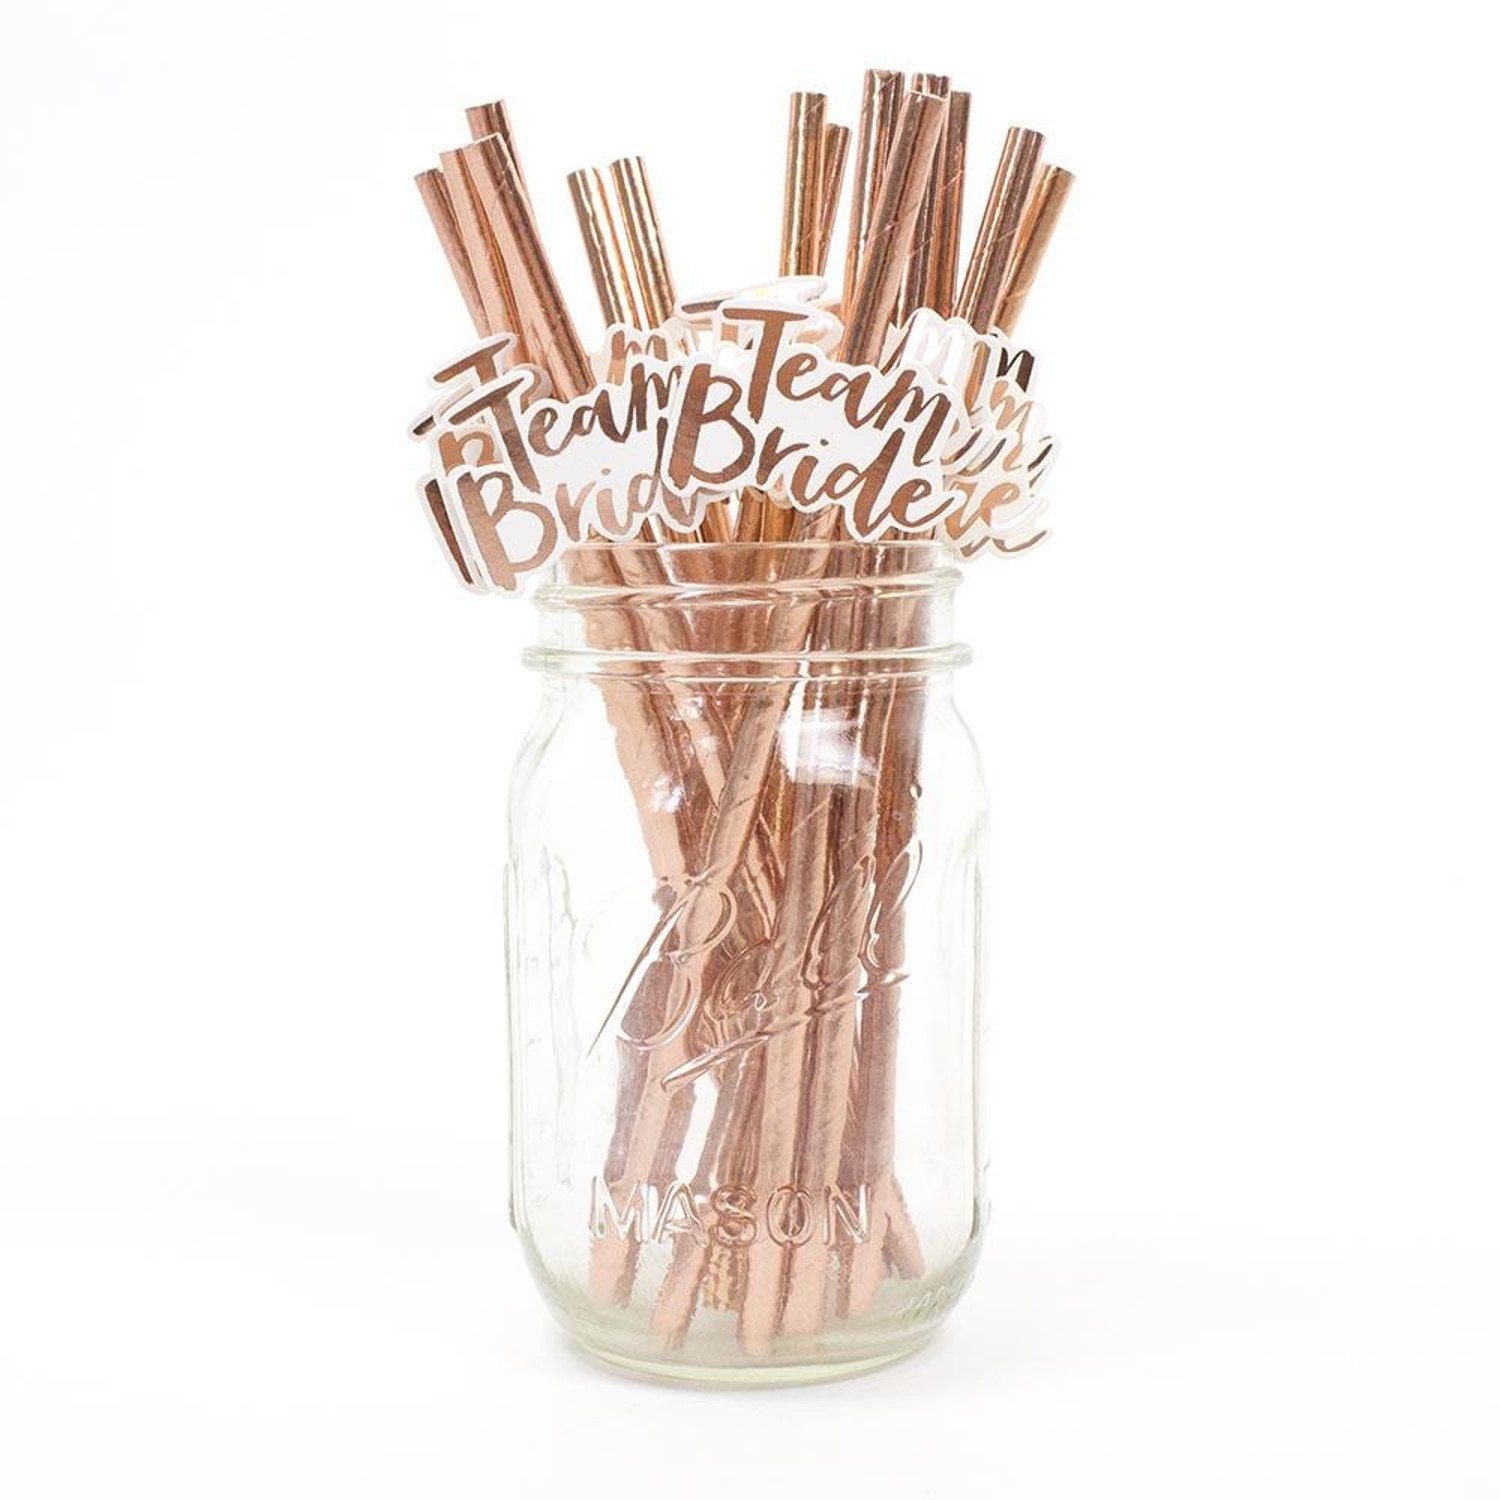 10pcs Hen Party Team Bride Straws Drink Straw Novelty Straw For